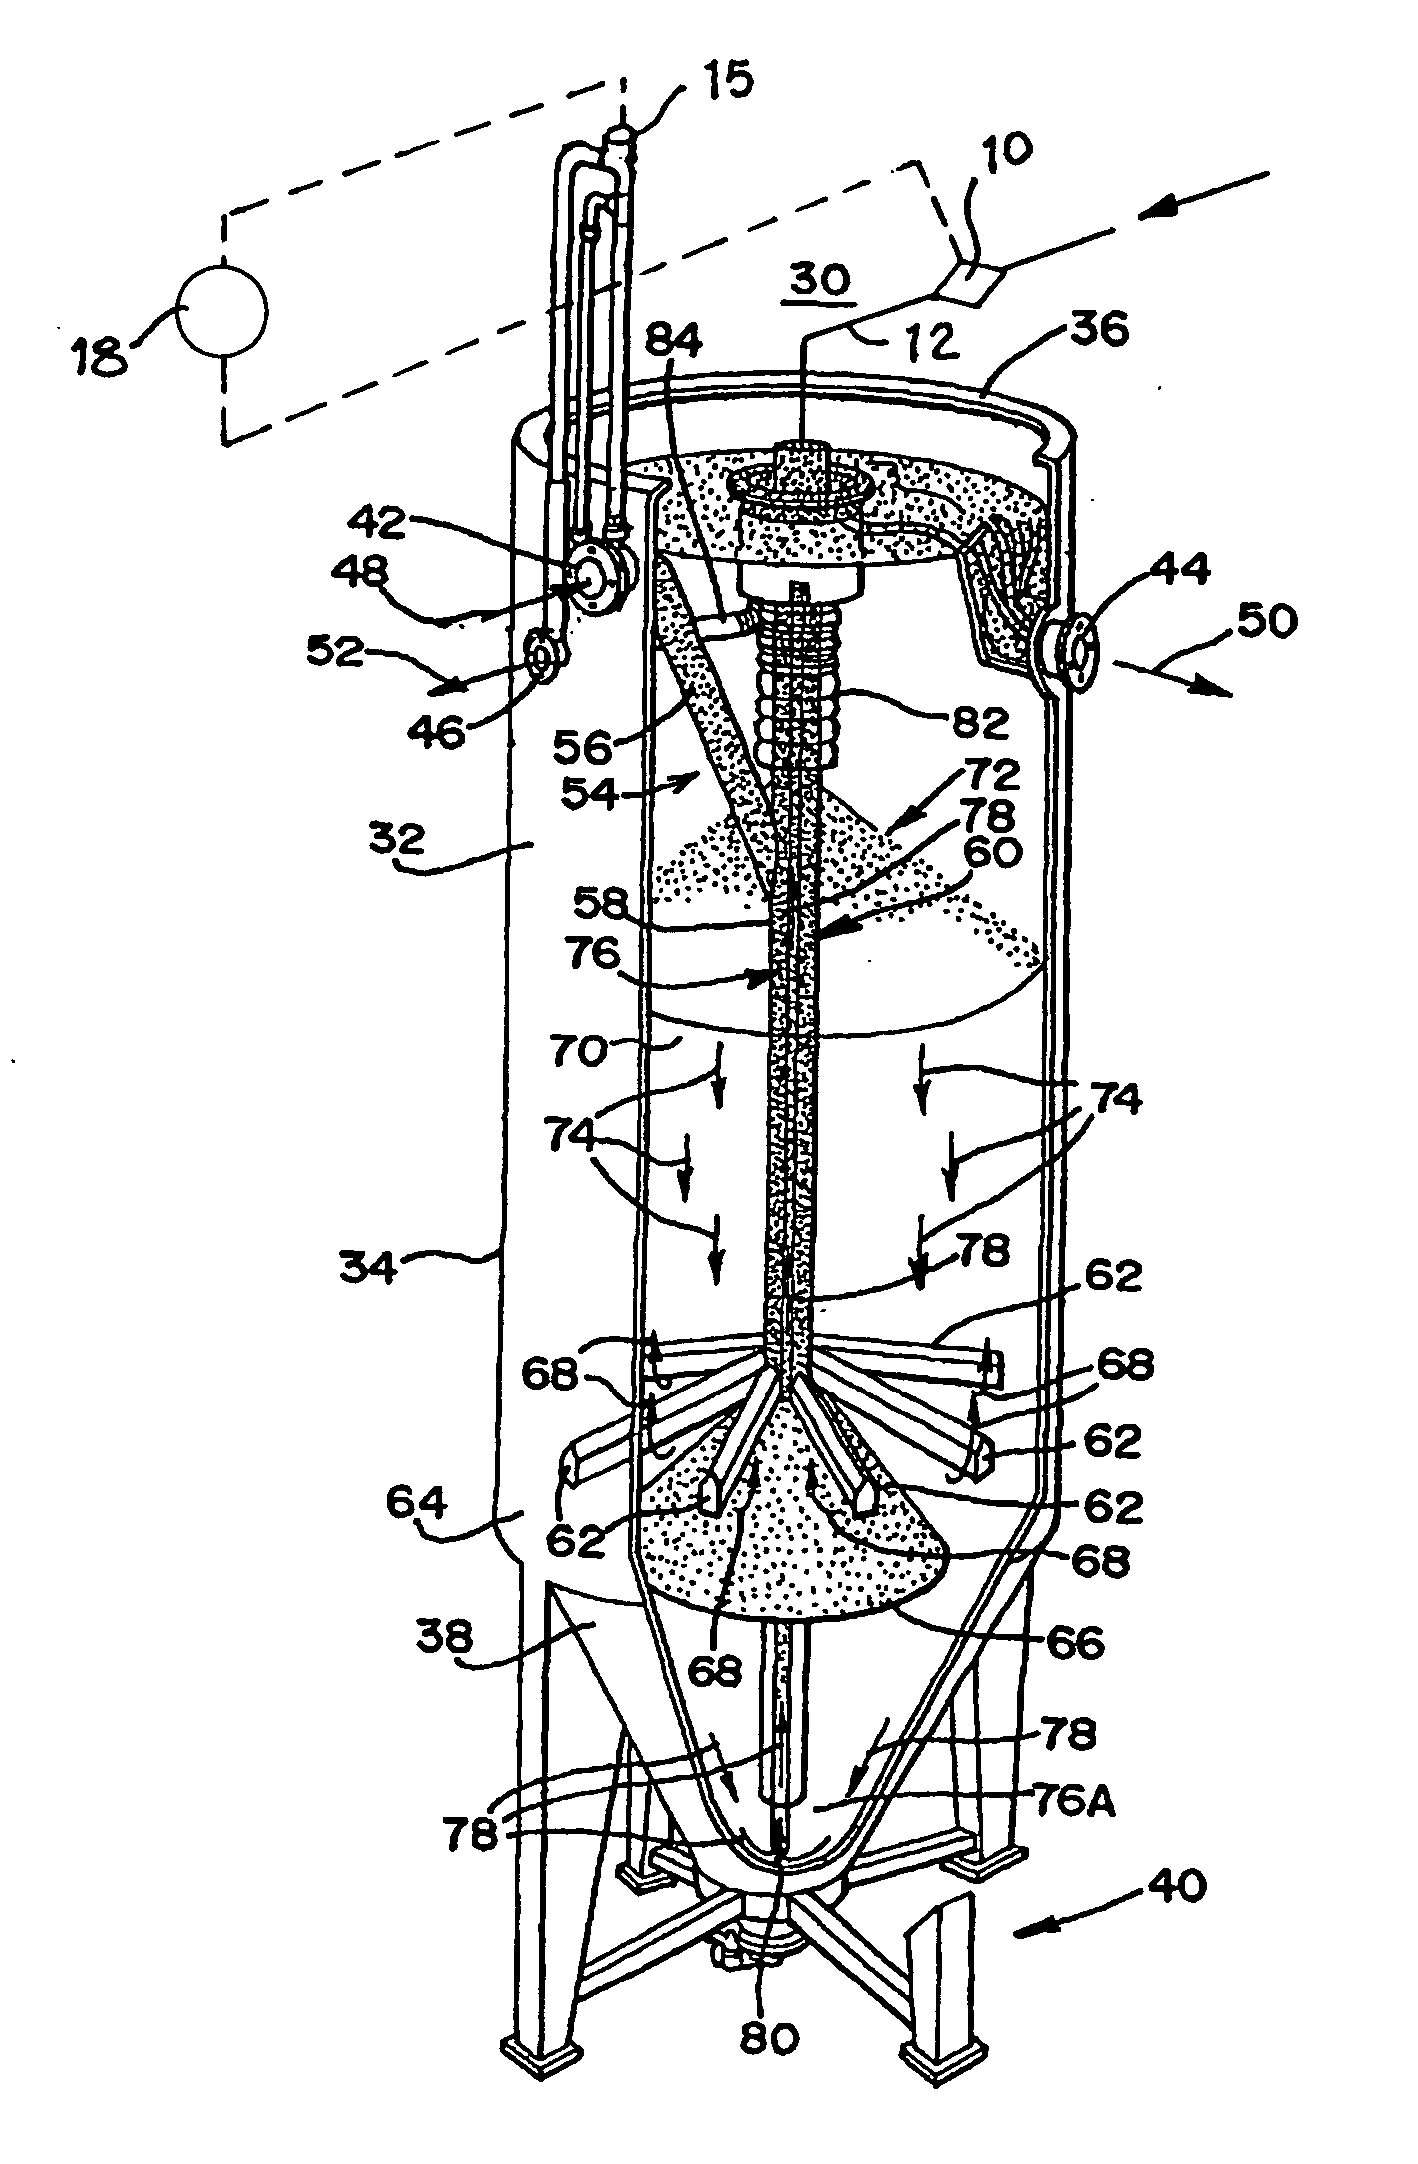 Automated water treatment system and method of use